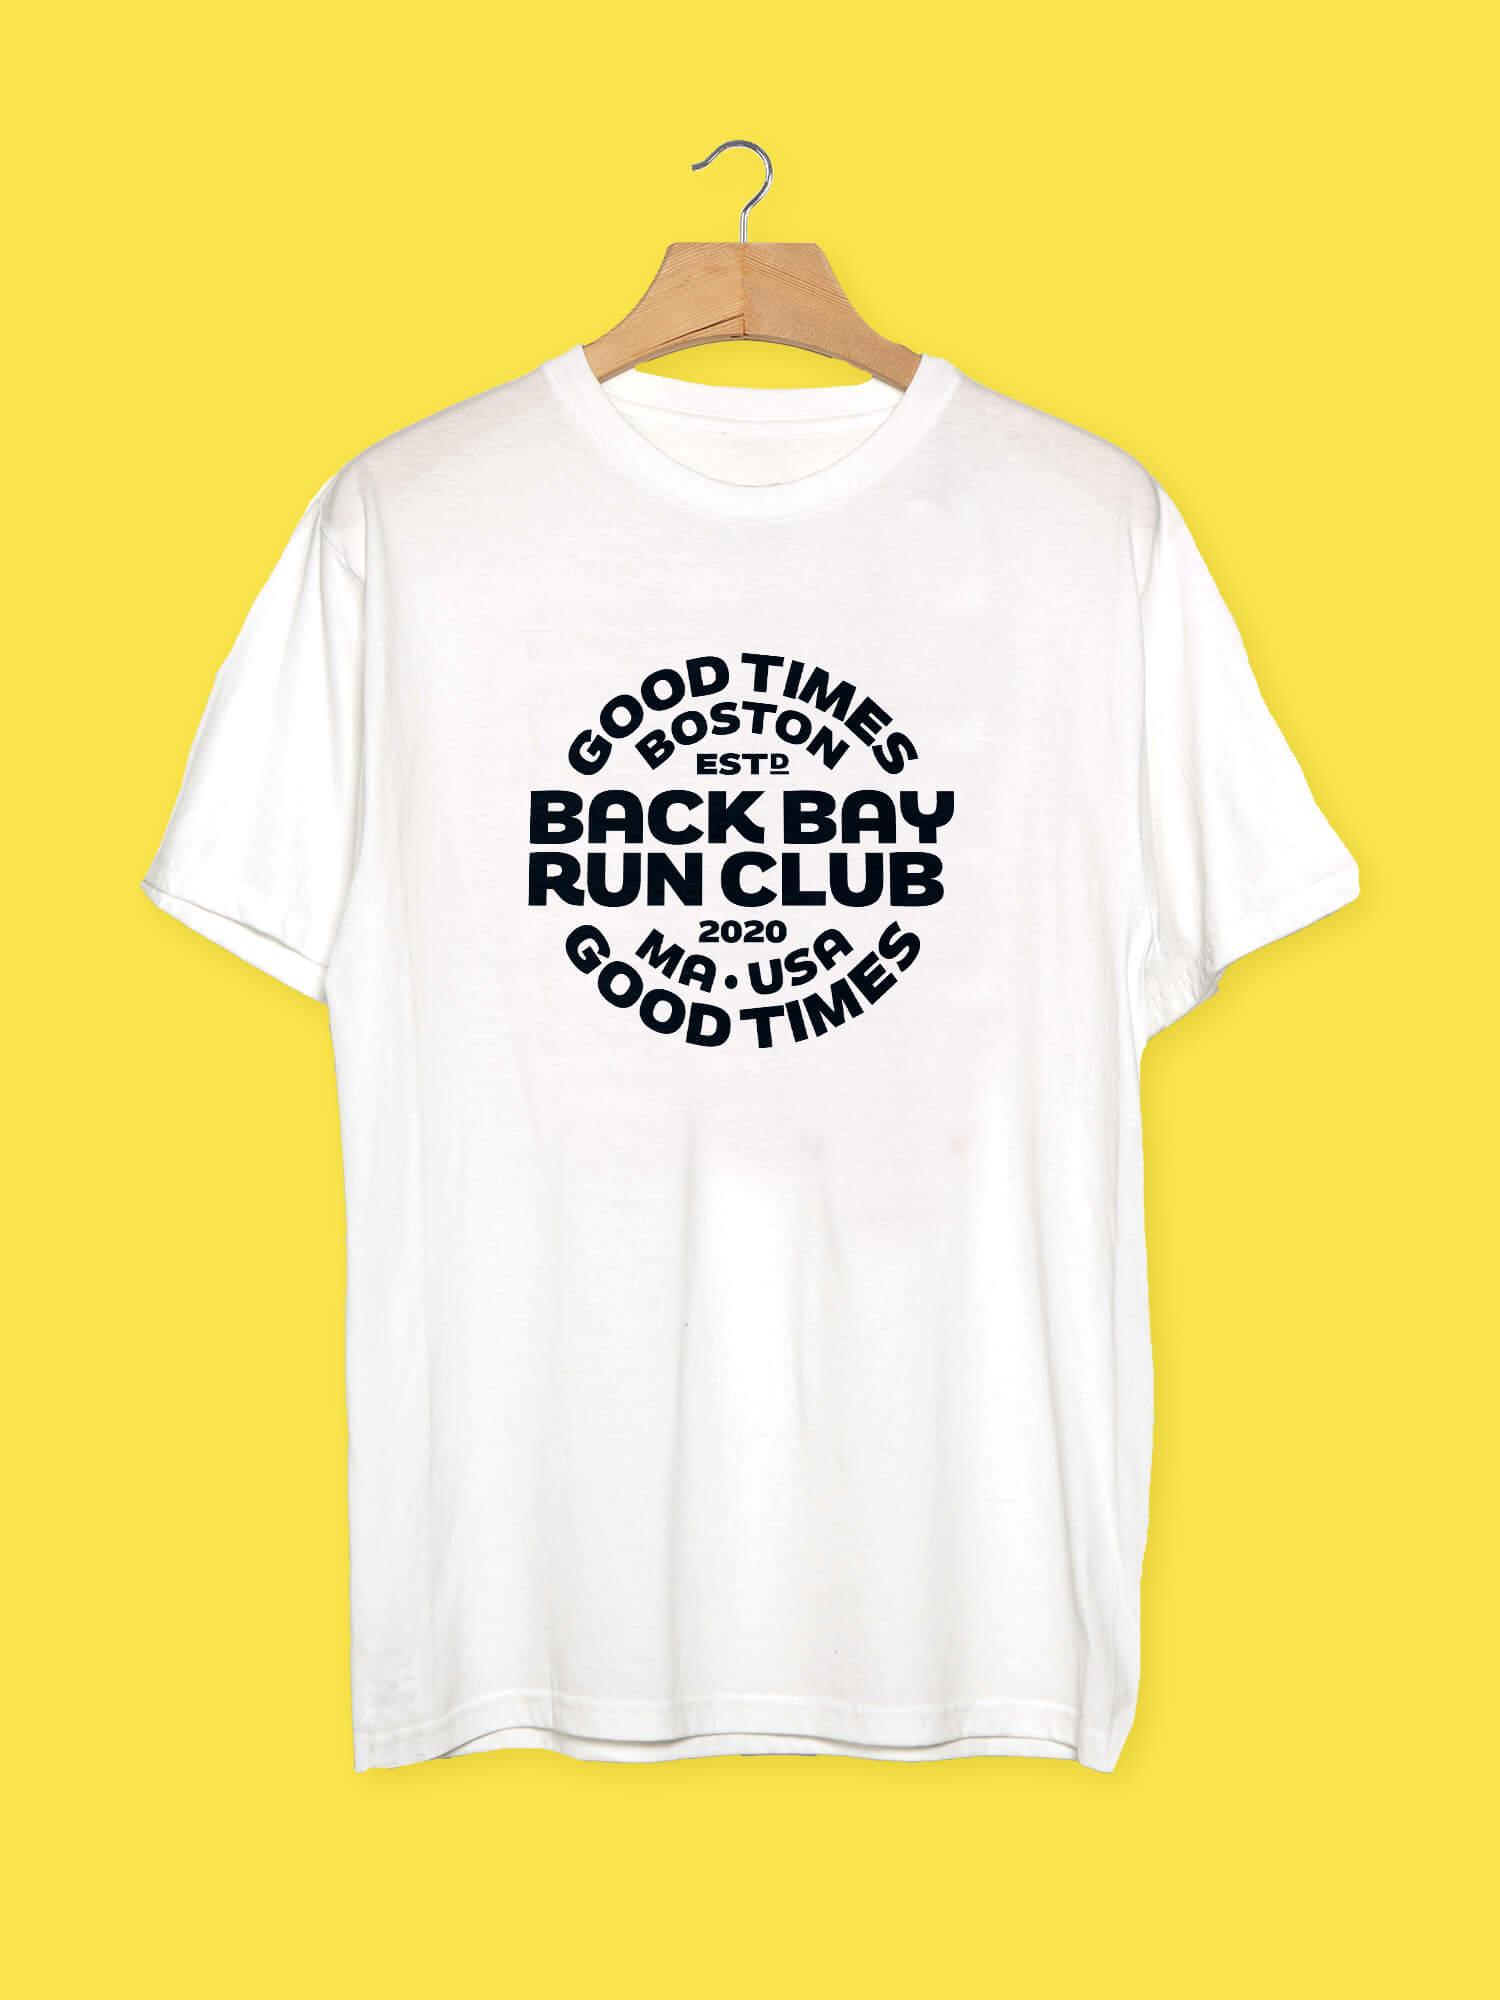 Black typographic 'Good Times' badge printed on a white t-shirt, created by Dan Fleming for Back Bay Run Club, established 2020 in Boston